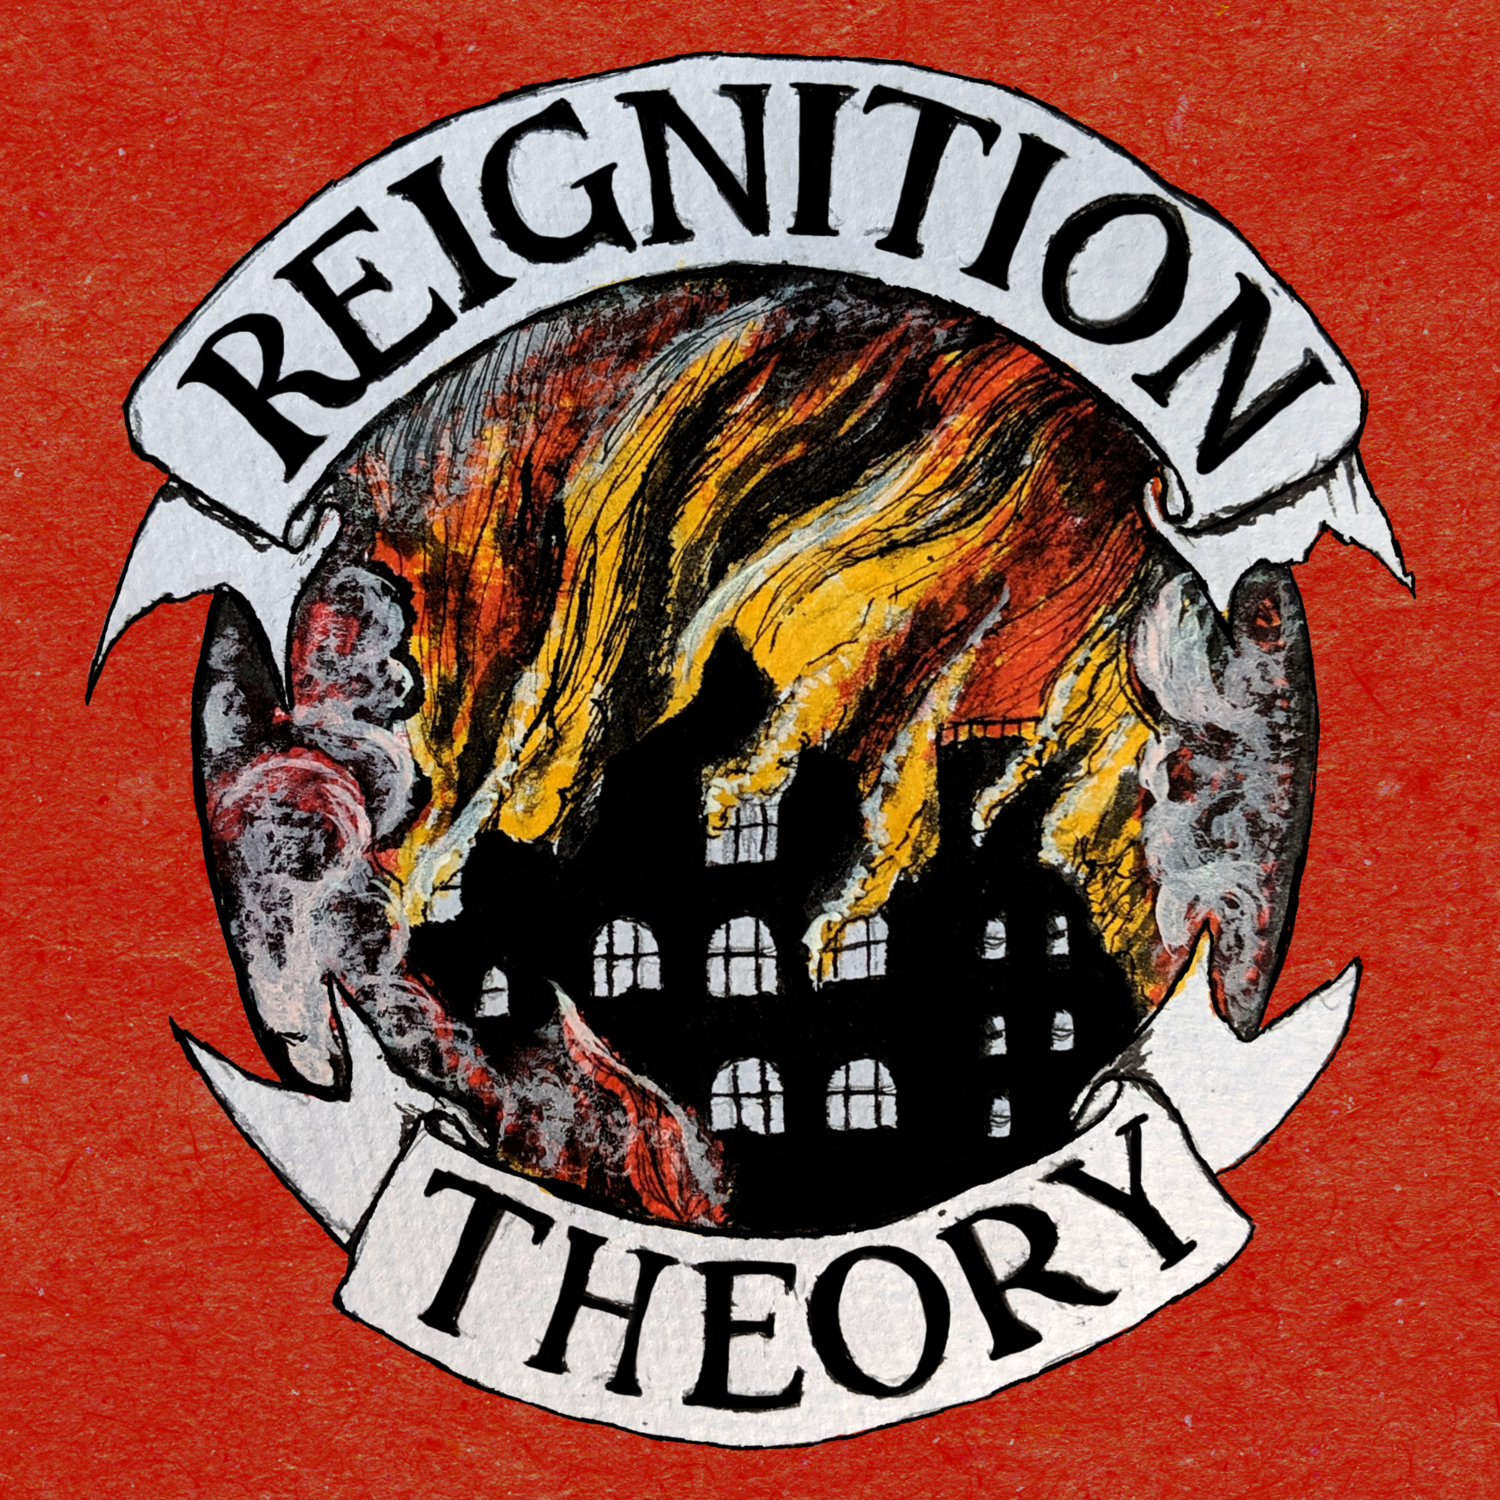 Episode 1 - Murder - The Reignition Theory